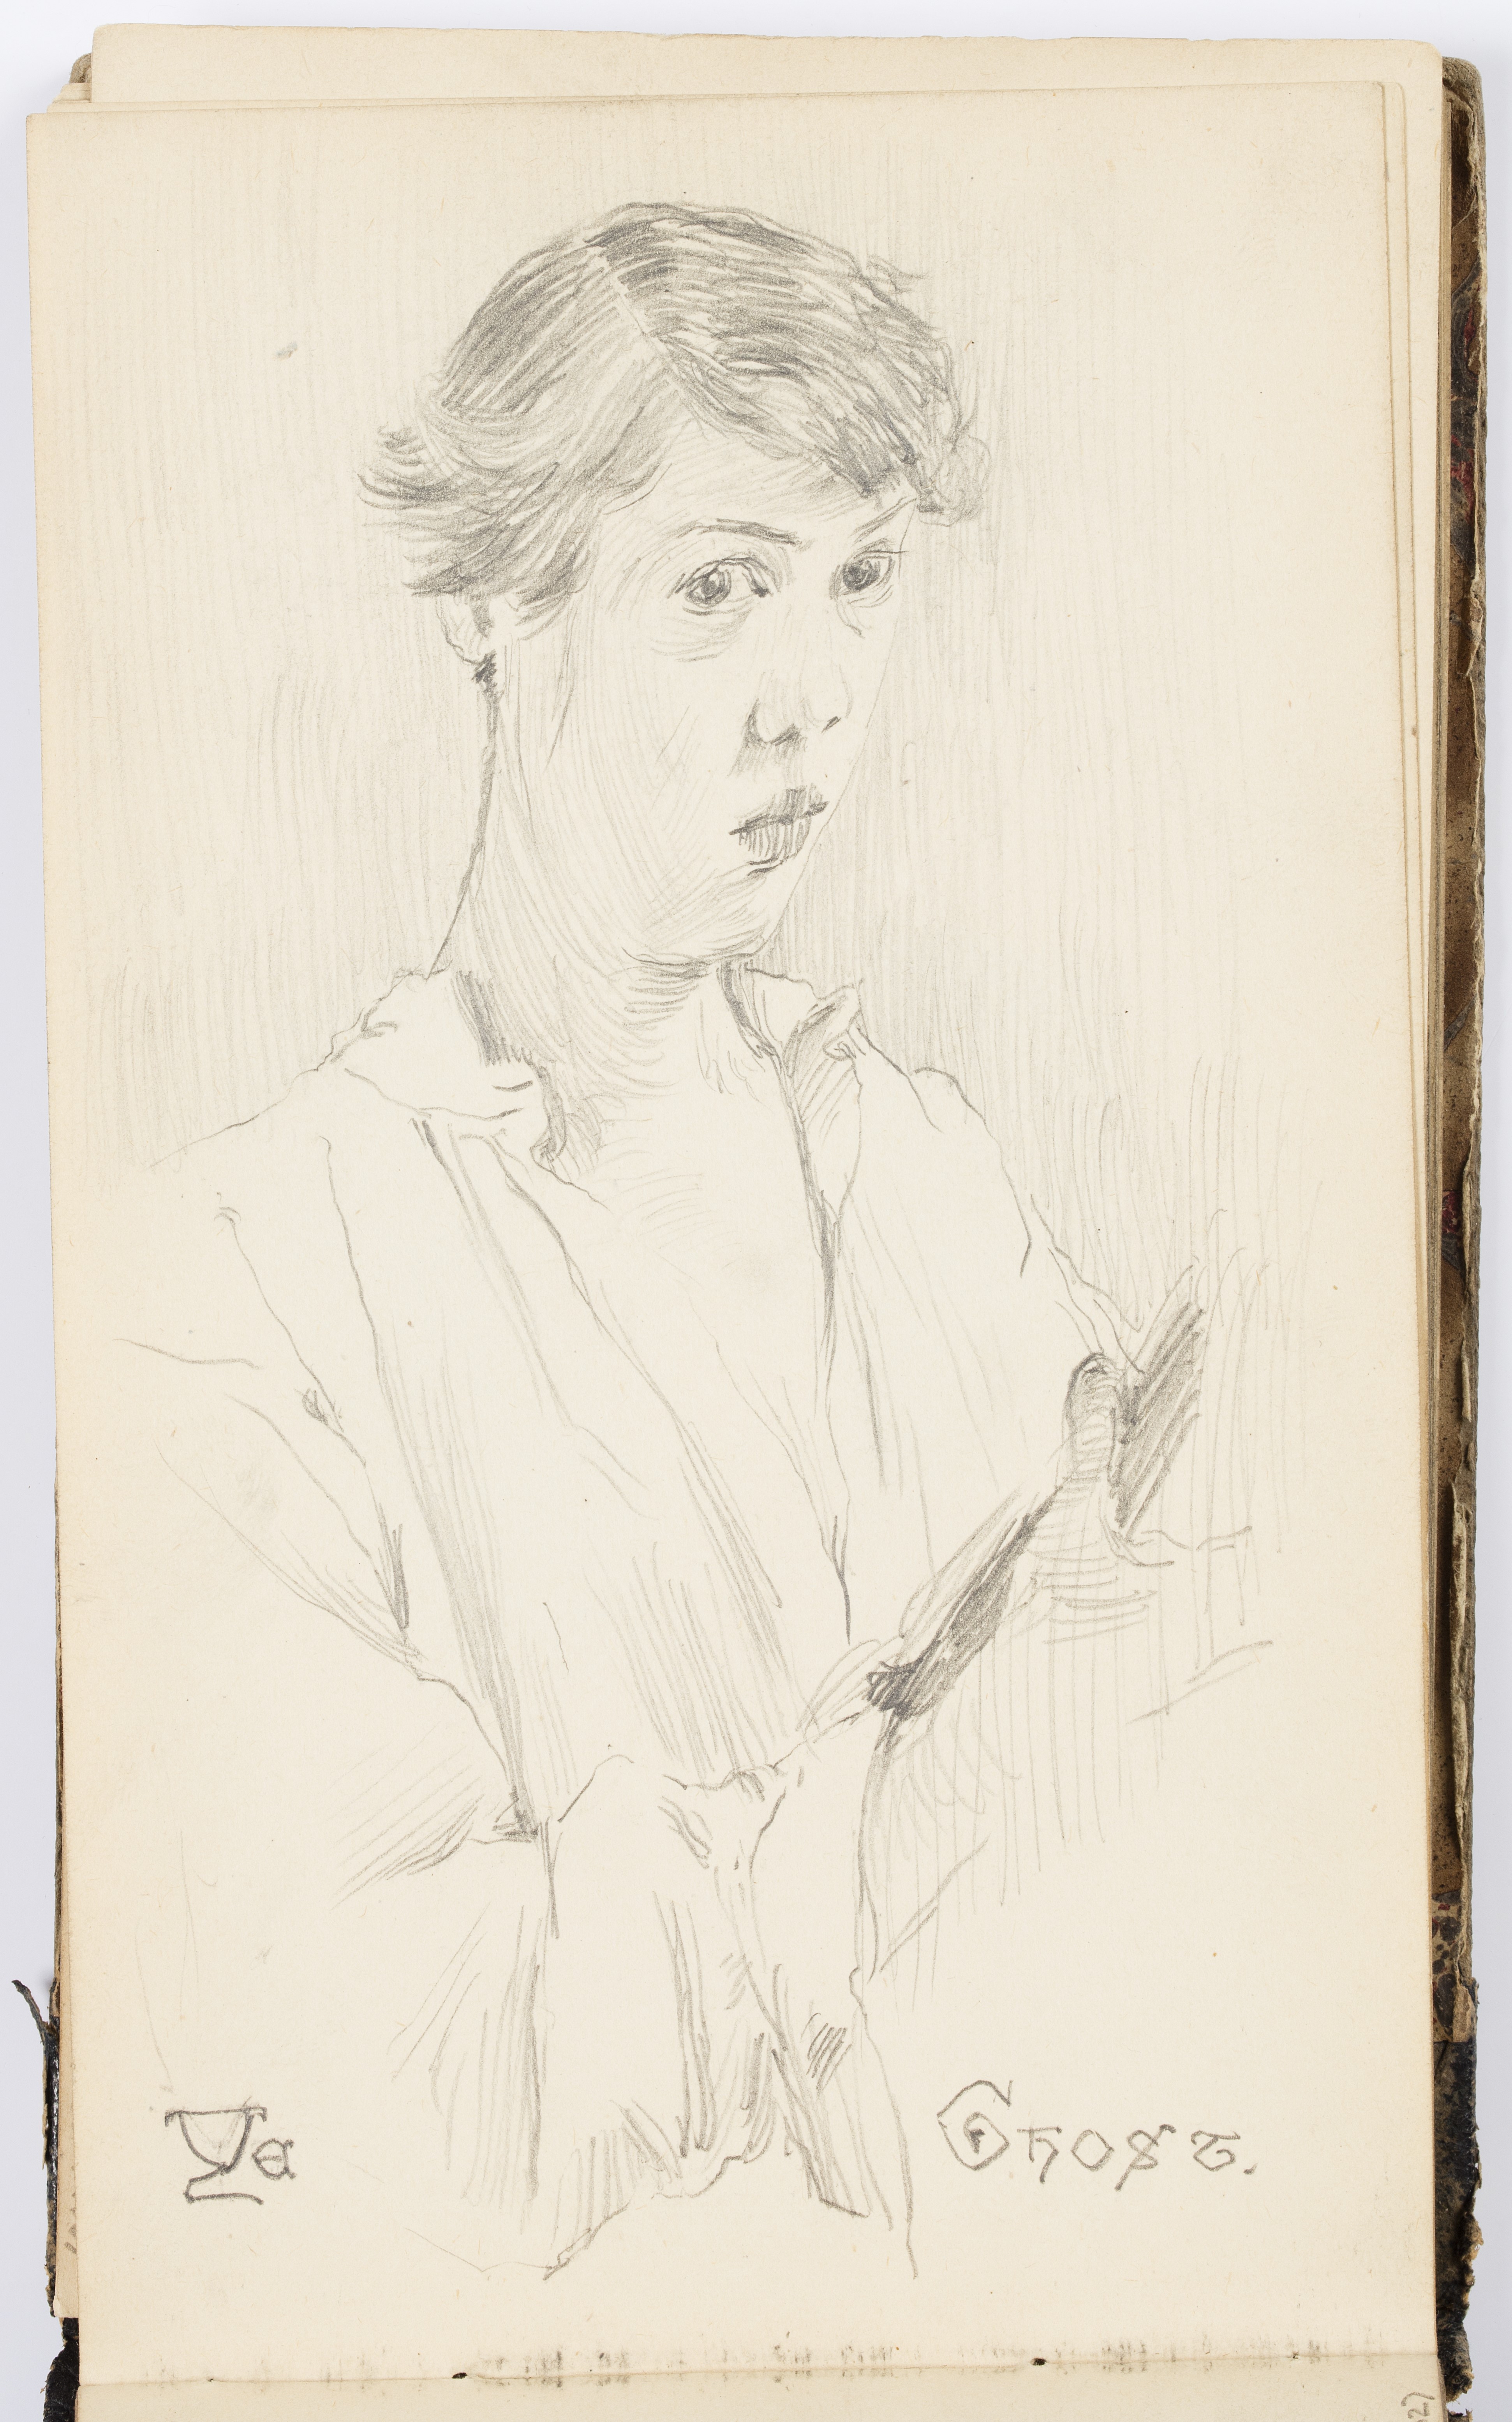 Image features a drawing, a self-portrait of the artist, collar open, holding a book in his right hand. Please scroll down to read the blog post about this object.